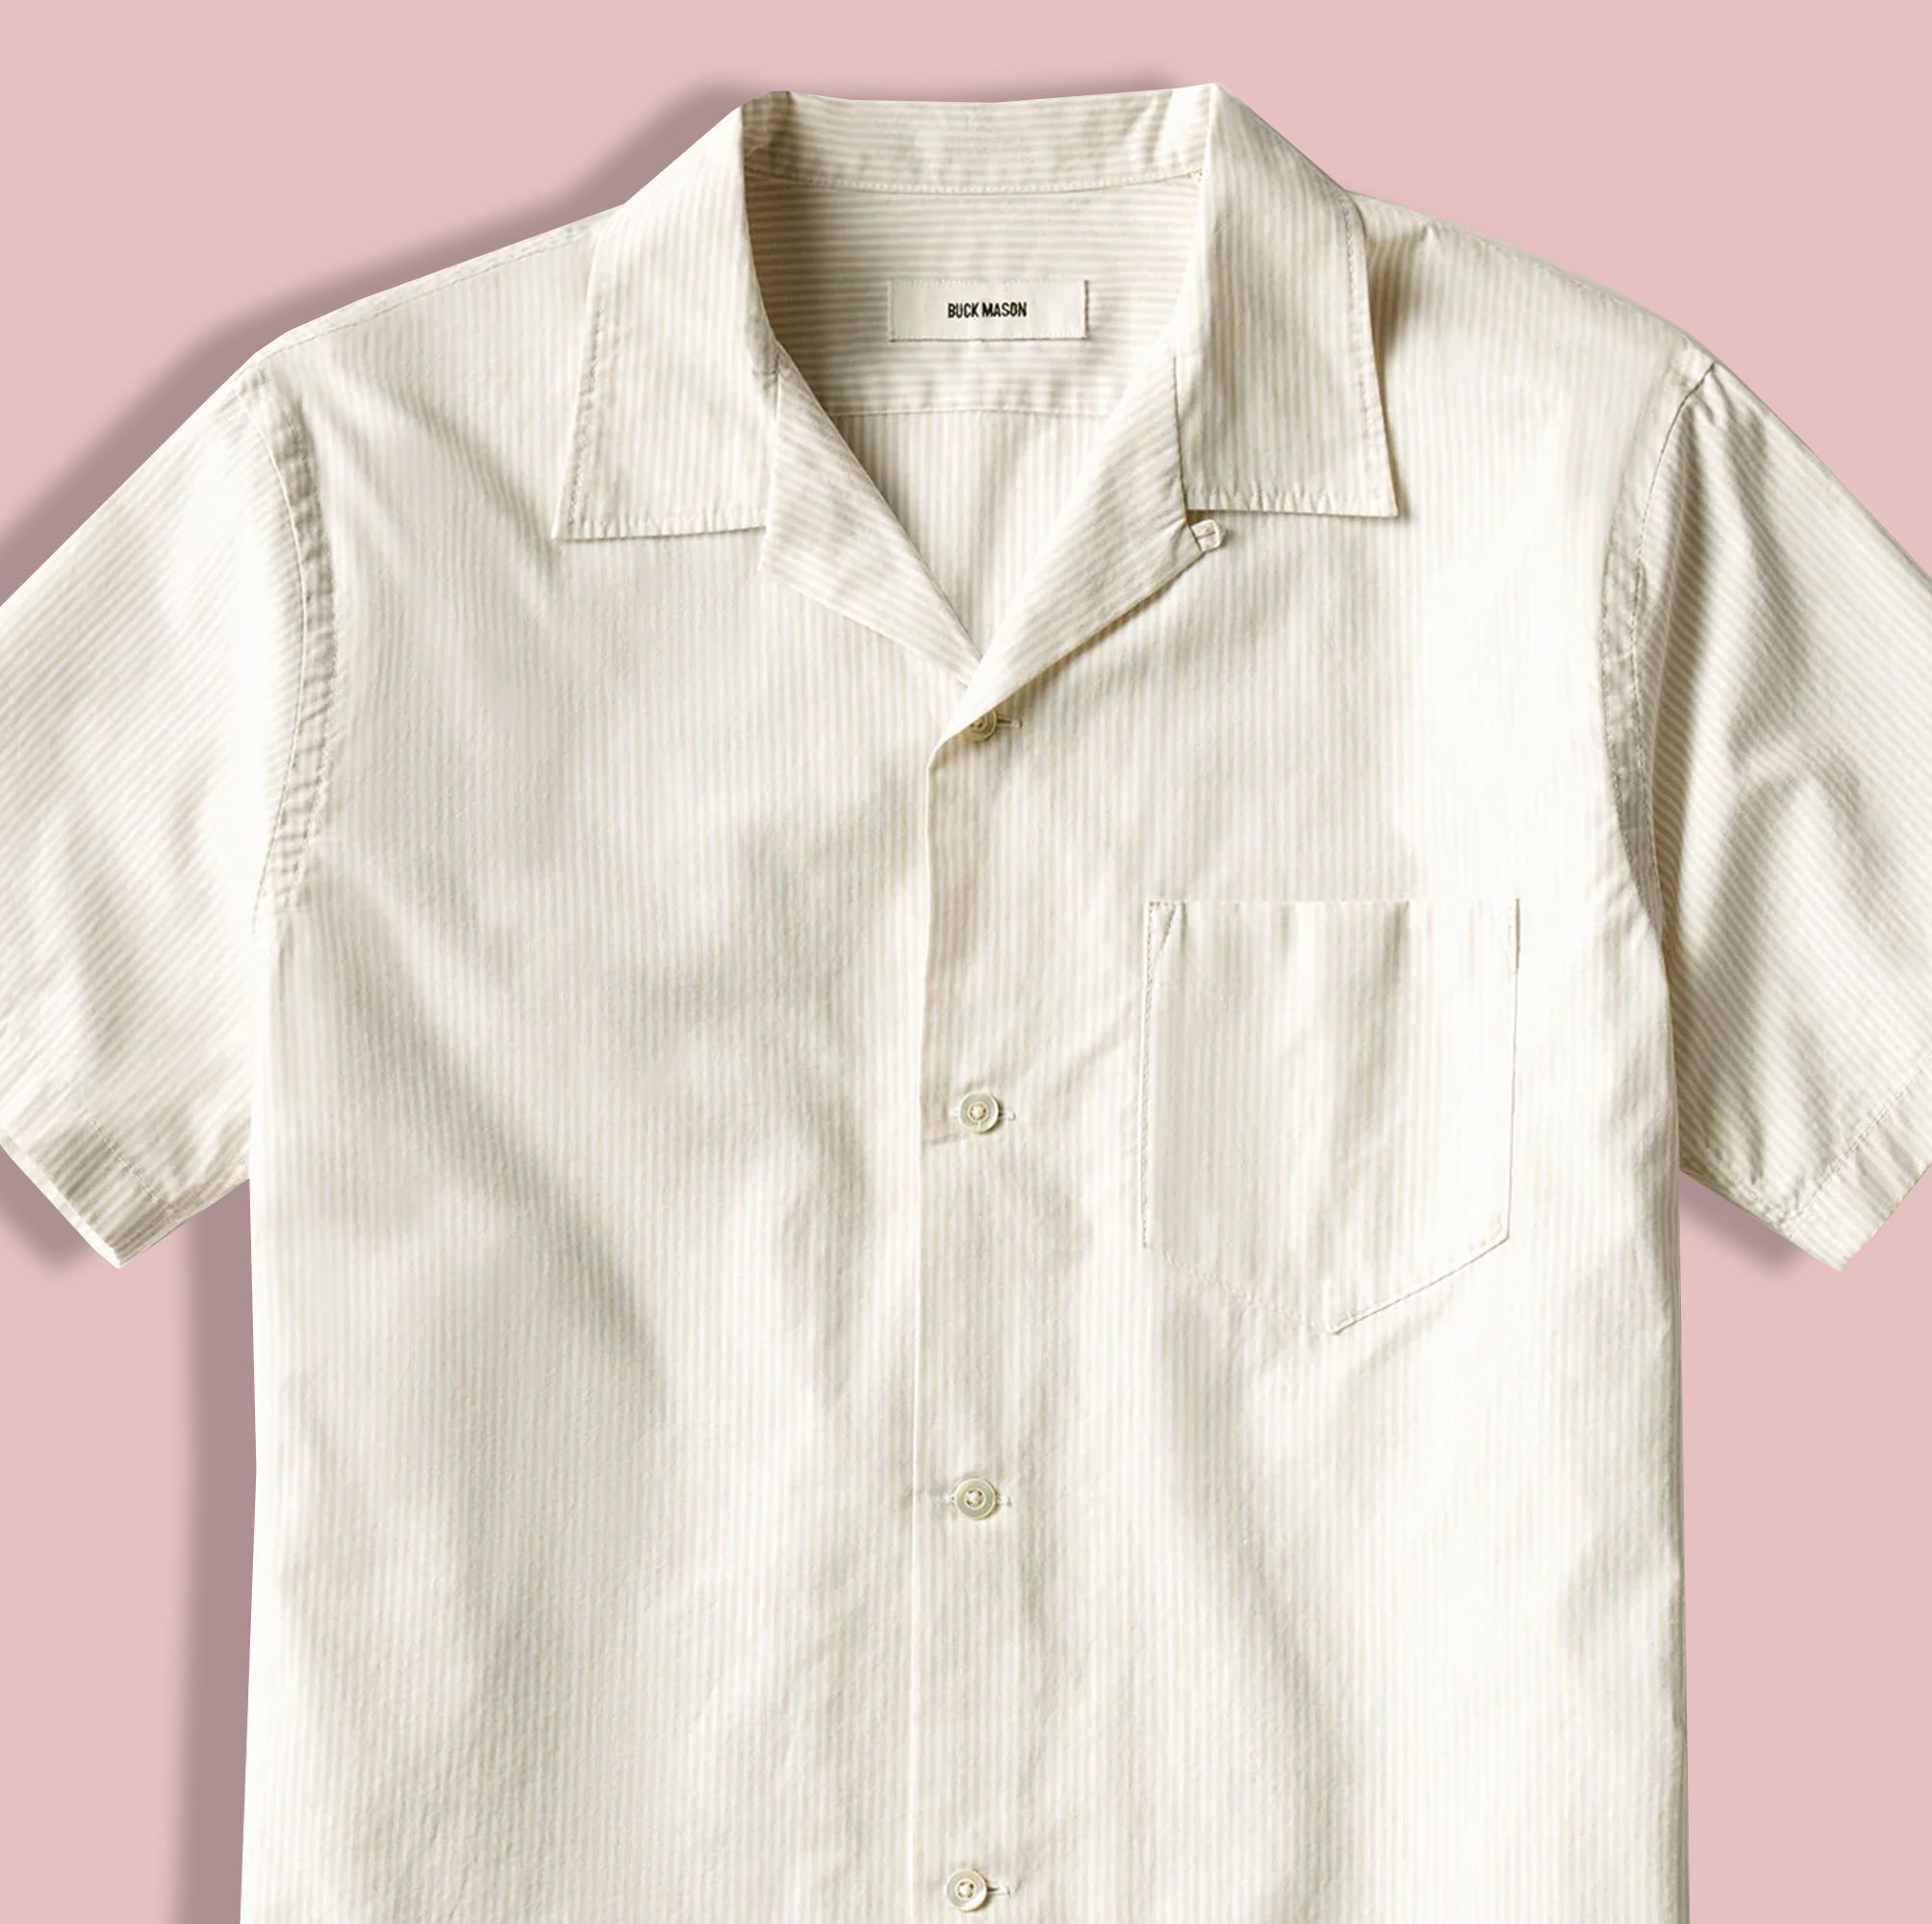 Camp Collar Shirts Are Essential for Summer. Here Are 20 of The Best Ones.